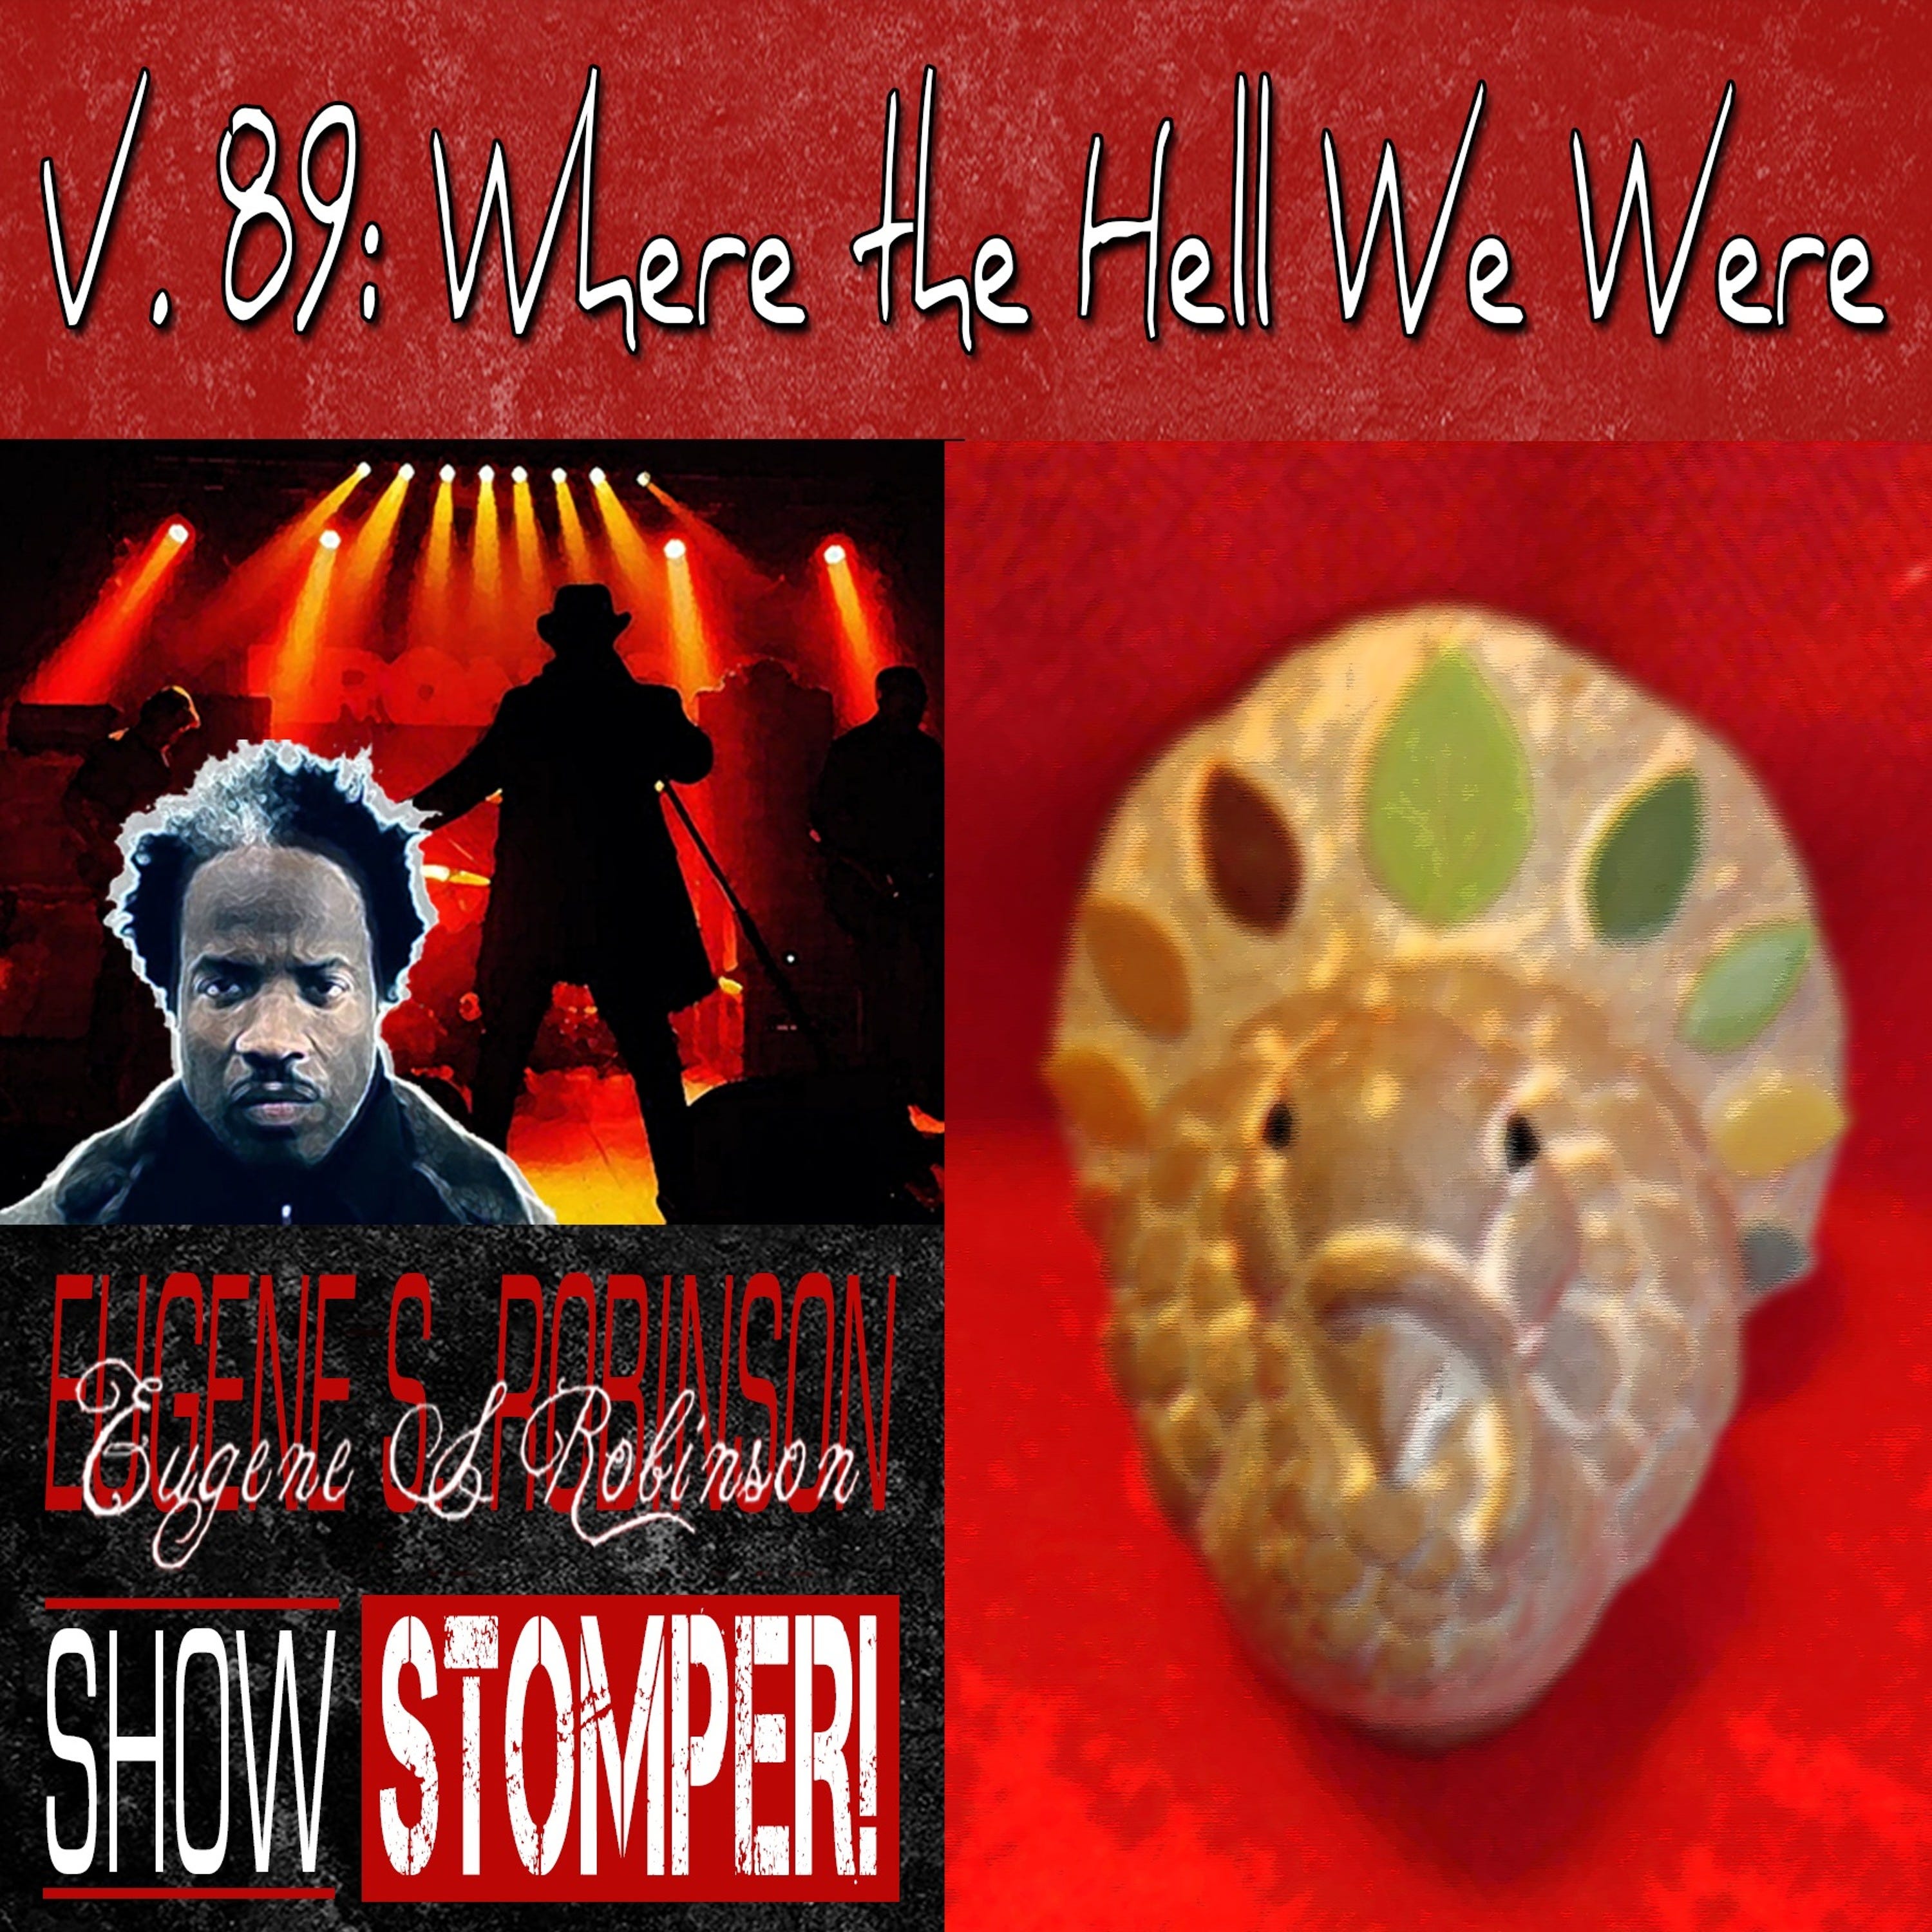 V. 89 Where The Hell We Were On The Eugene S. Robinson Show Stomper!